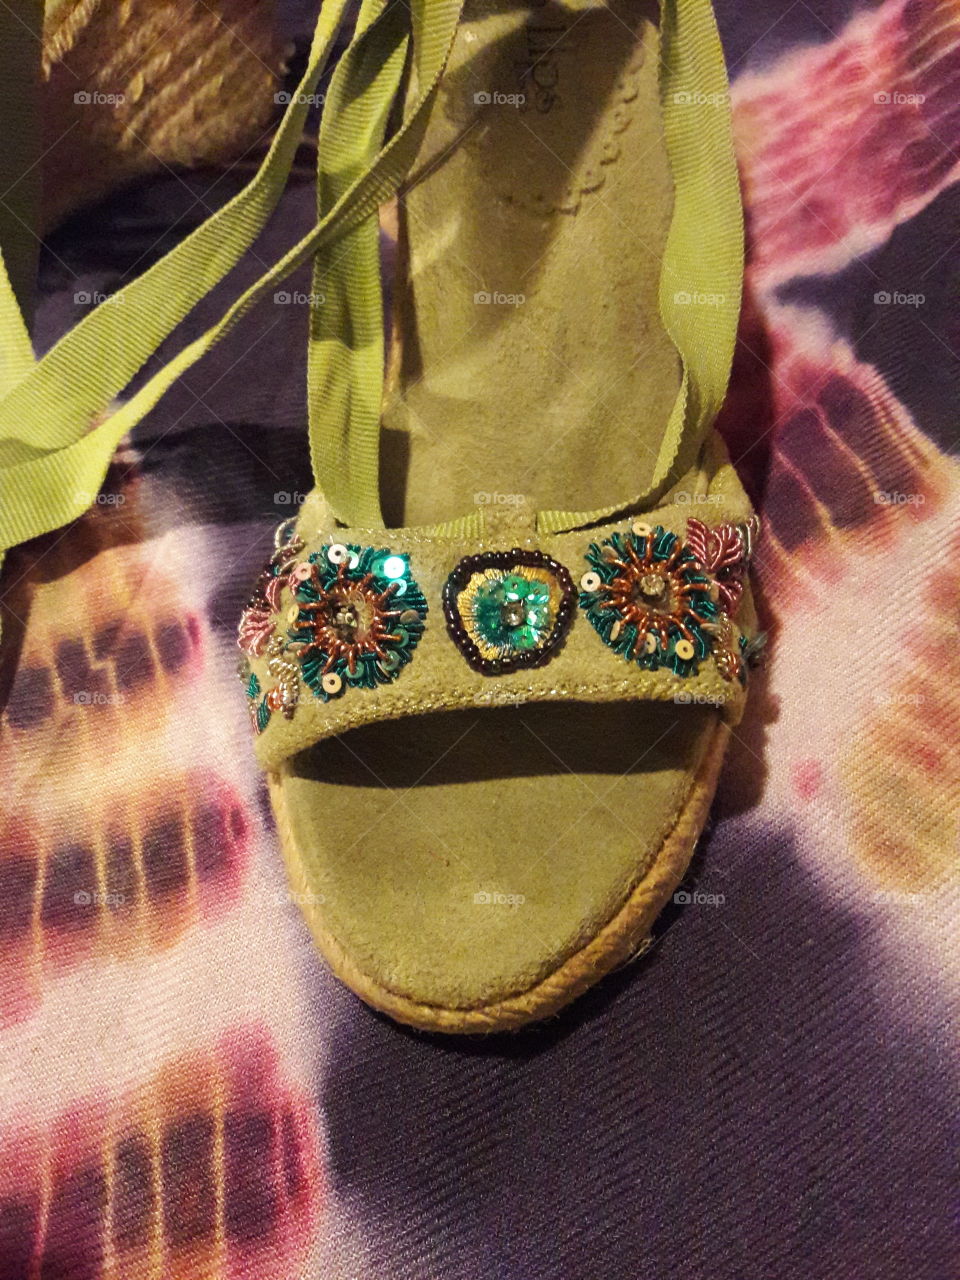 A close-up of the beadwork on a lime green suede wedge heel.